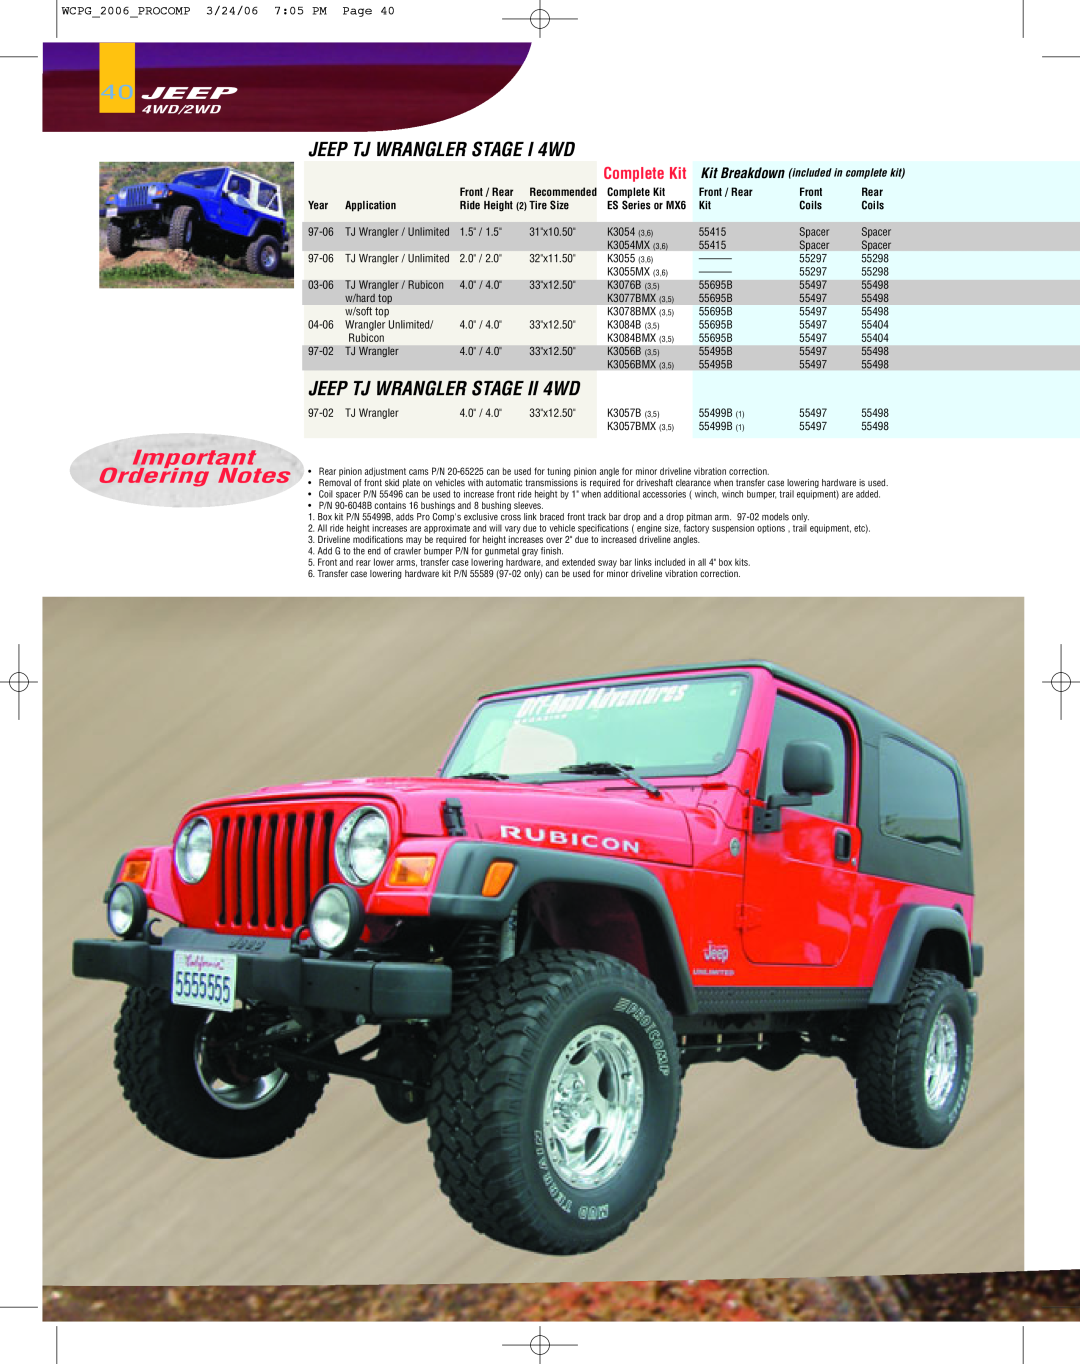 Jeep specifications Ordering Notes, JEEP TJ WRANGLER STAGE I 4WD, 40JEEP, Complete Kit, 4WD/2WD 